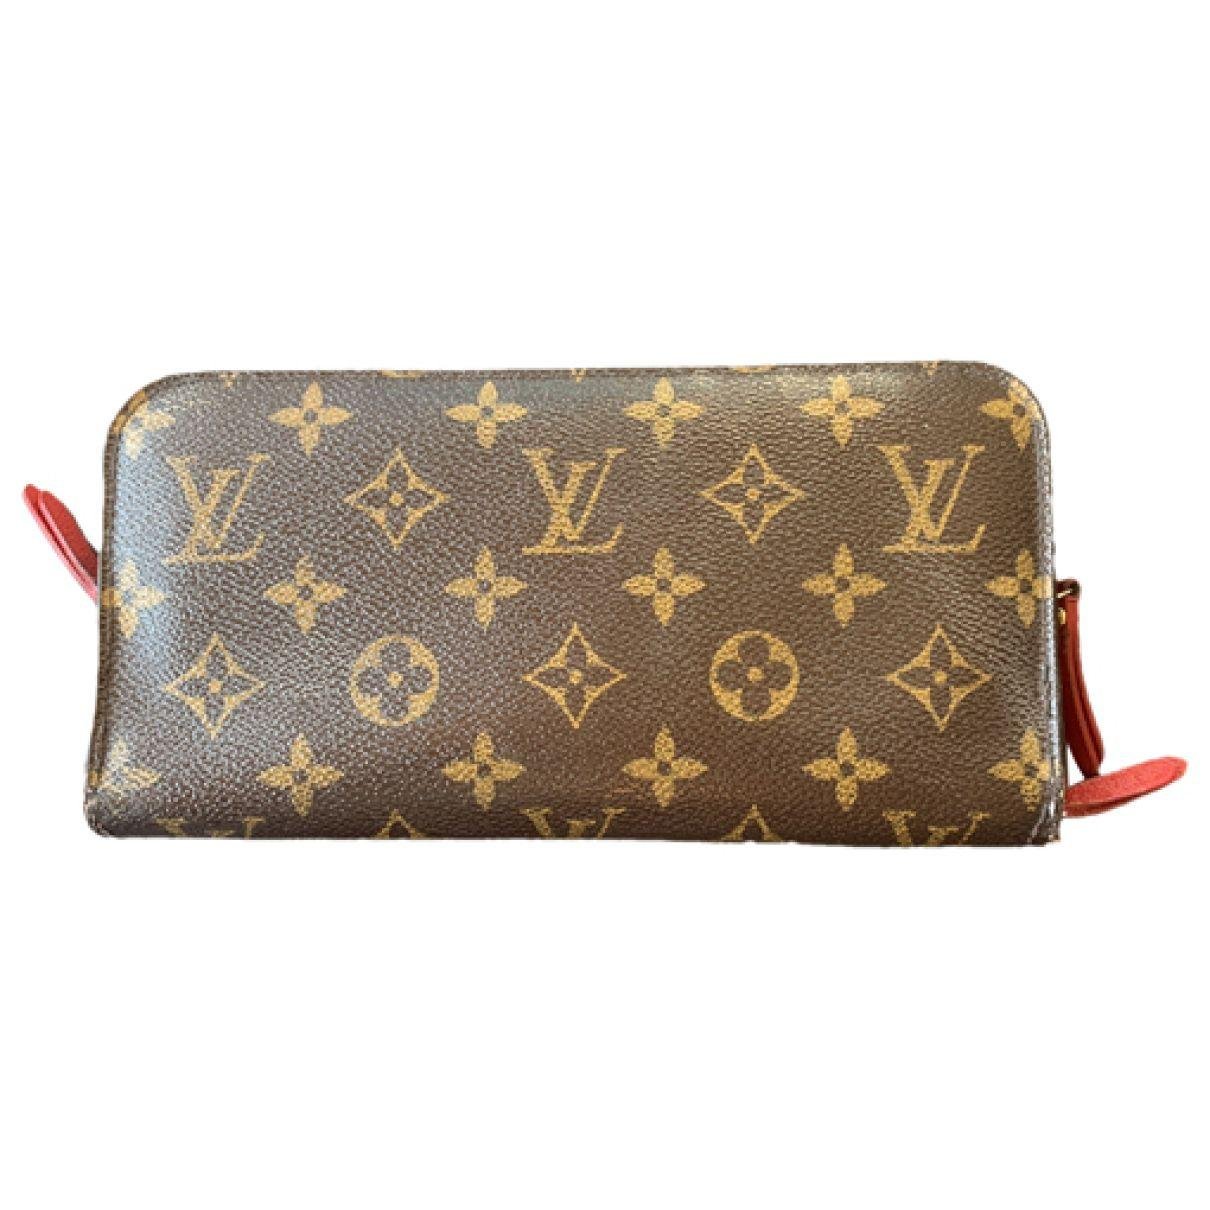 Insolite wallet (Insolite) by LOUIS VUITTON